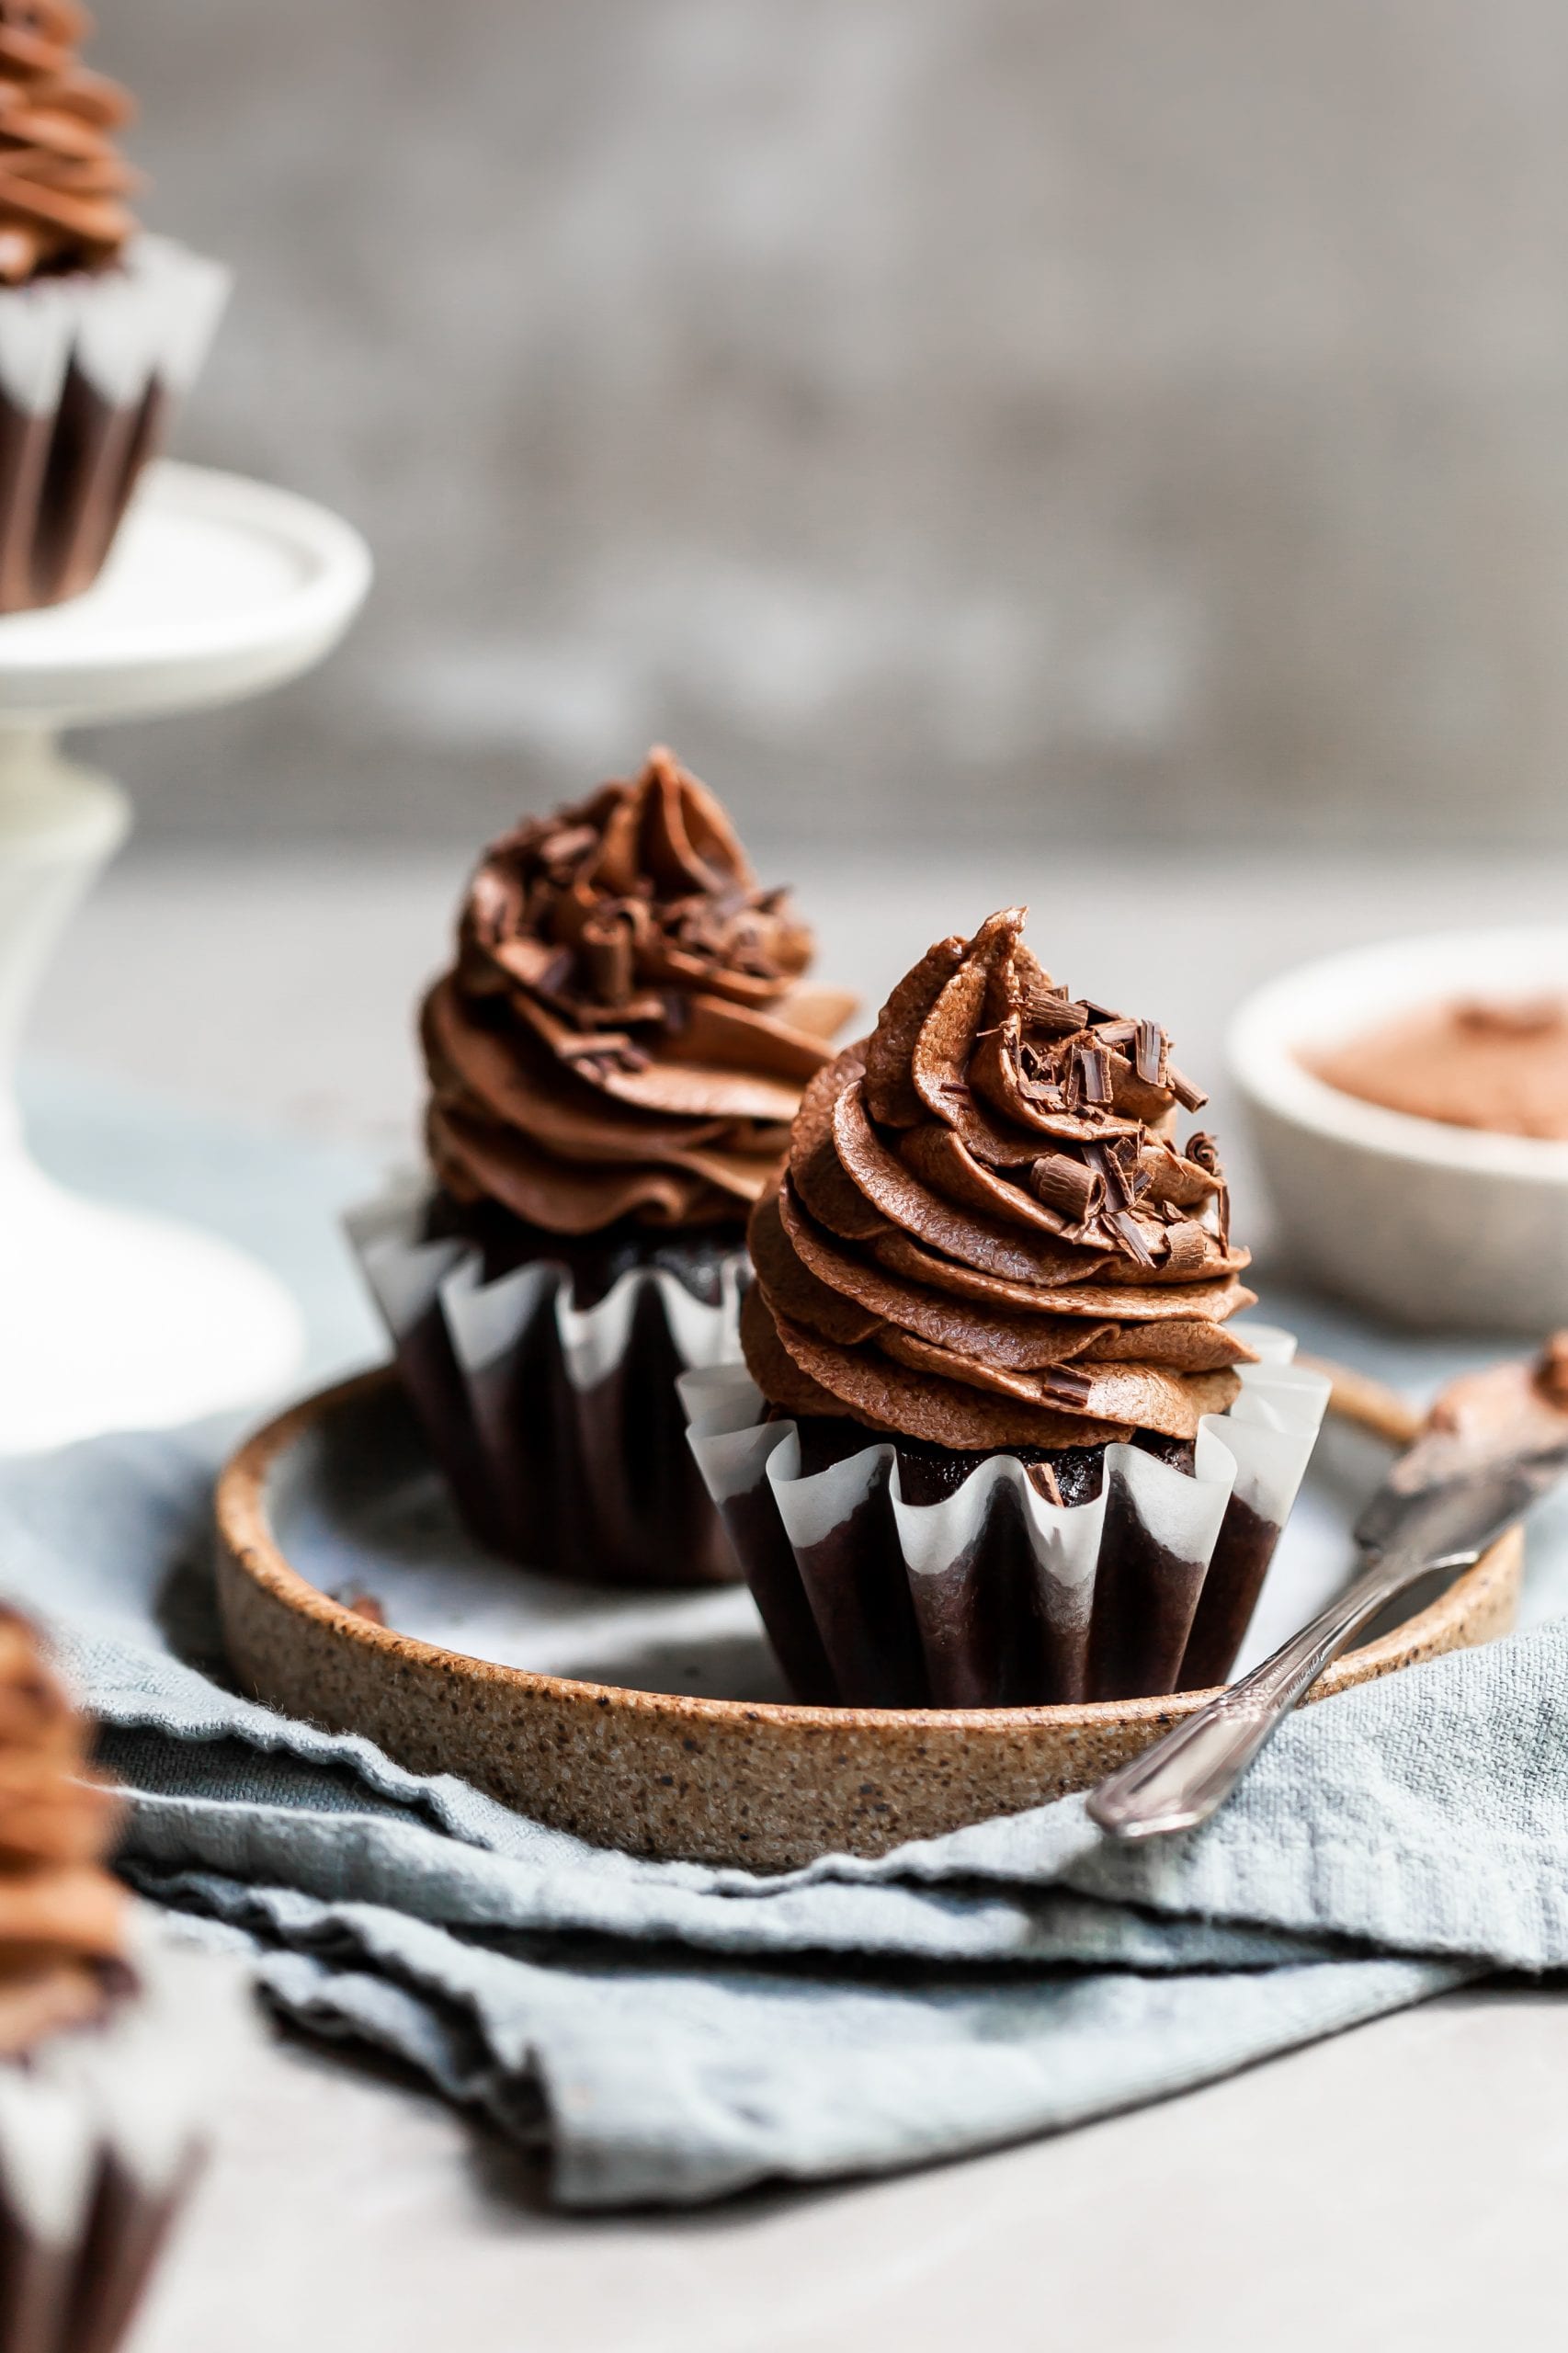 Two chocolate cupcakes on a plate with a bowl of fluffy chocolate ganache frosting on the side